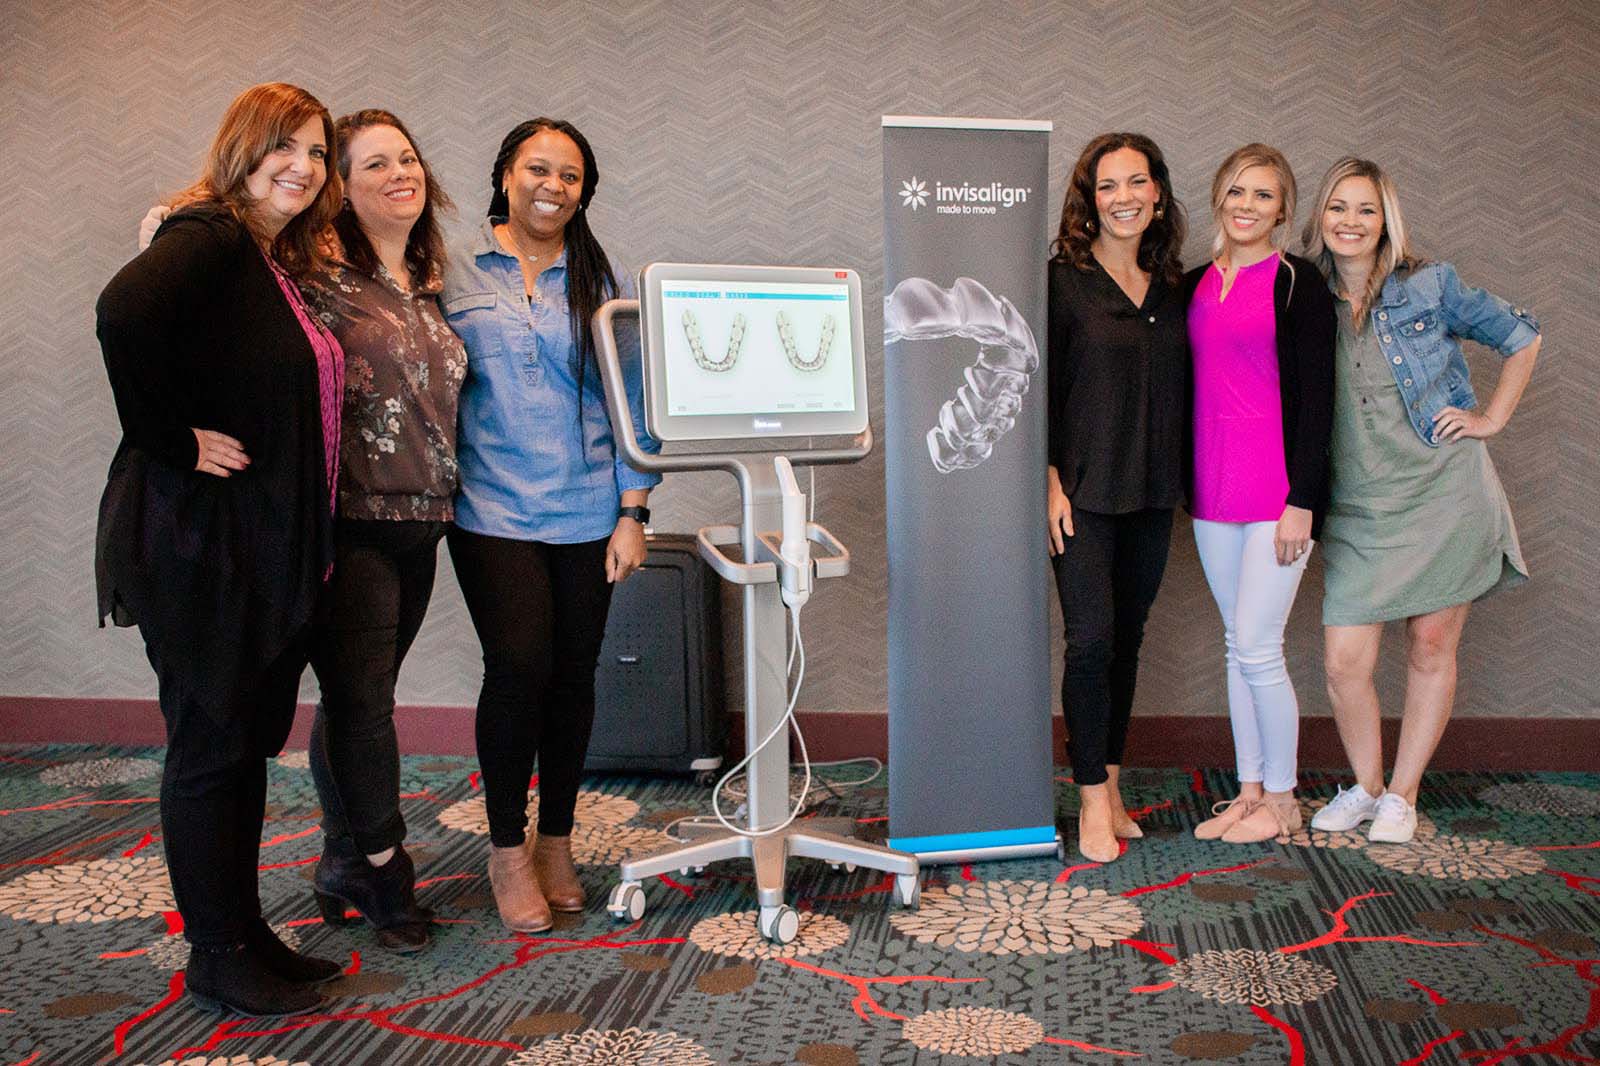 Kansas City Smiles Doctors and staff at Invisalign Continuing Education 